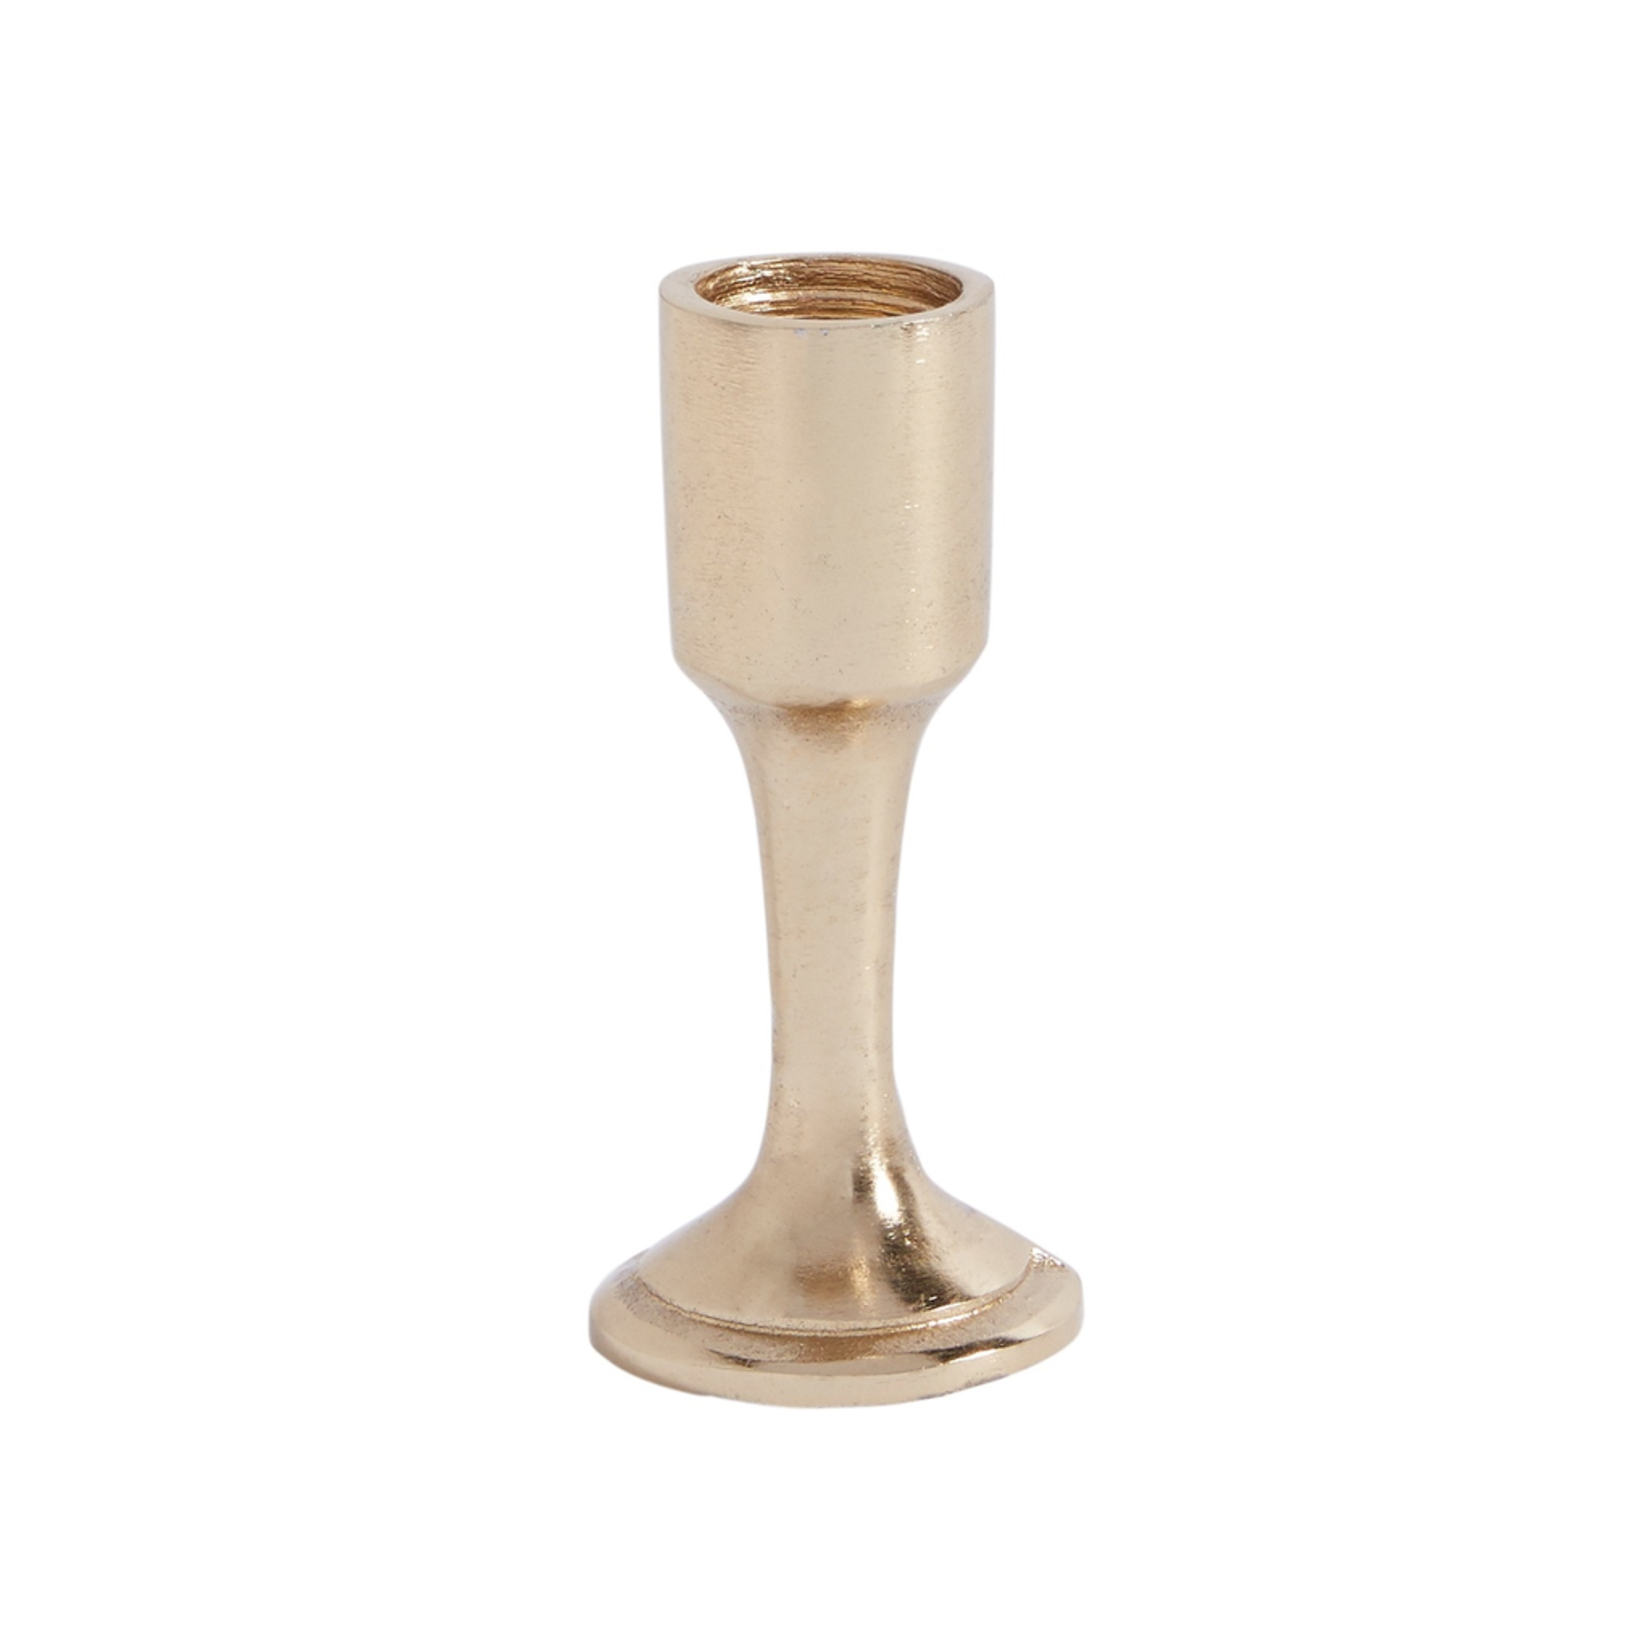 3.75”h x 1.75” SOLITAIRE CANDLESTICK (AD)